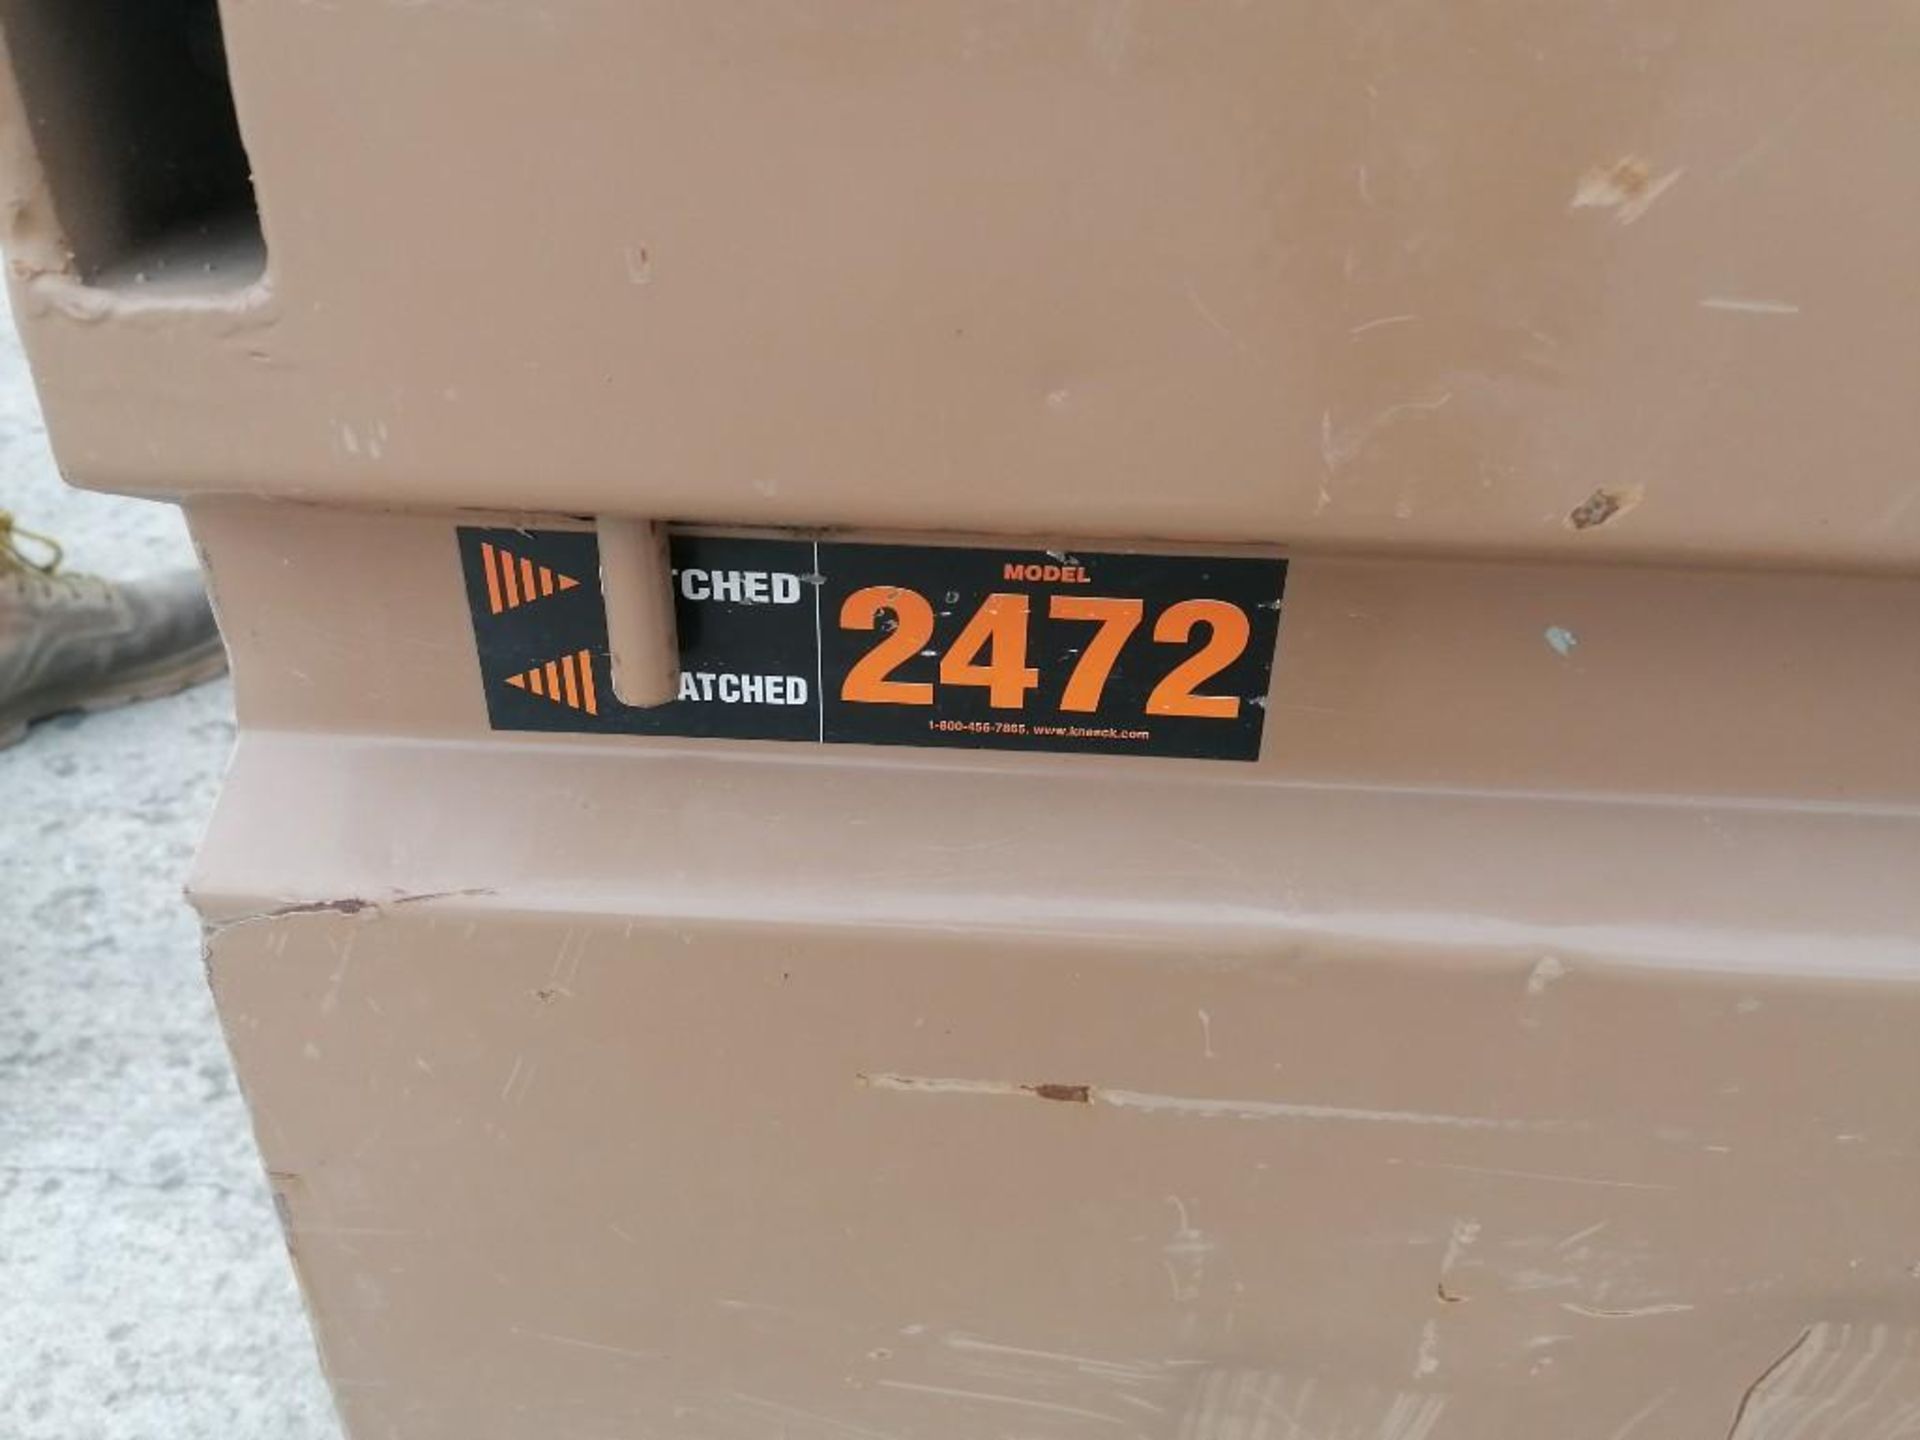 KNAACK Job Box Model 2472 with (58) Scaffolding Brackets. Located at 301 E Henry Street, Mt. - Image 2 of 4